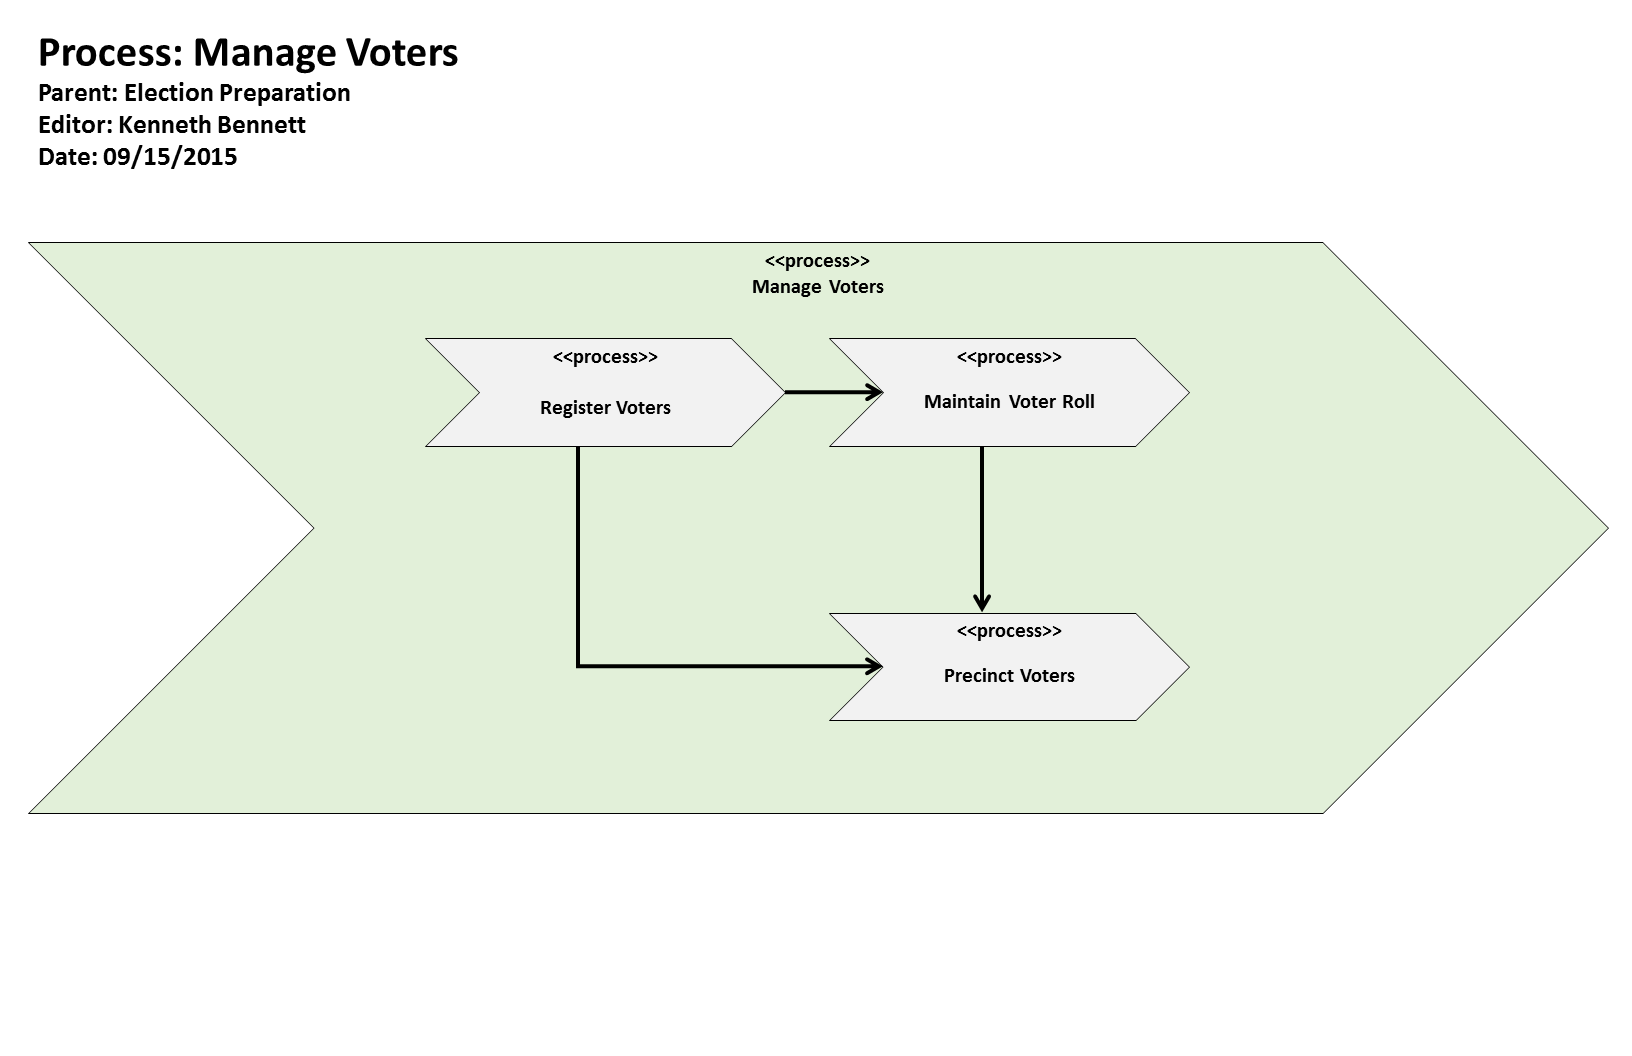 KB Process: Process: Manage Voters